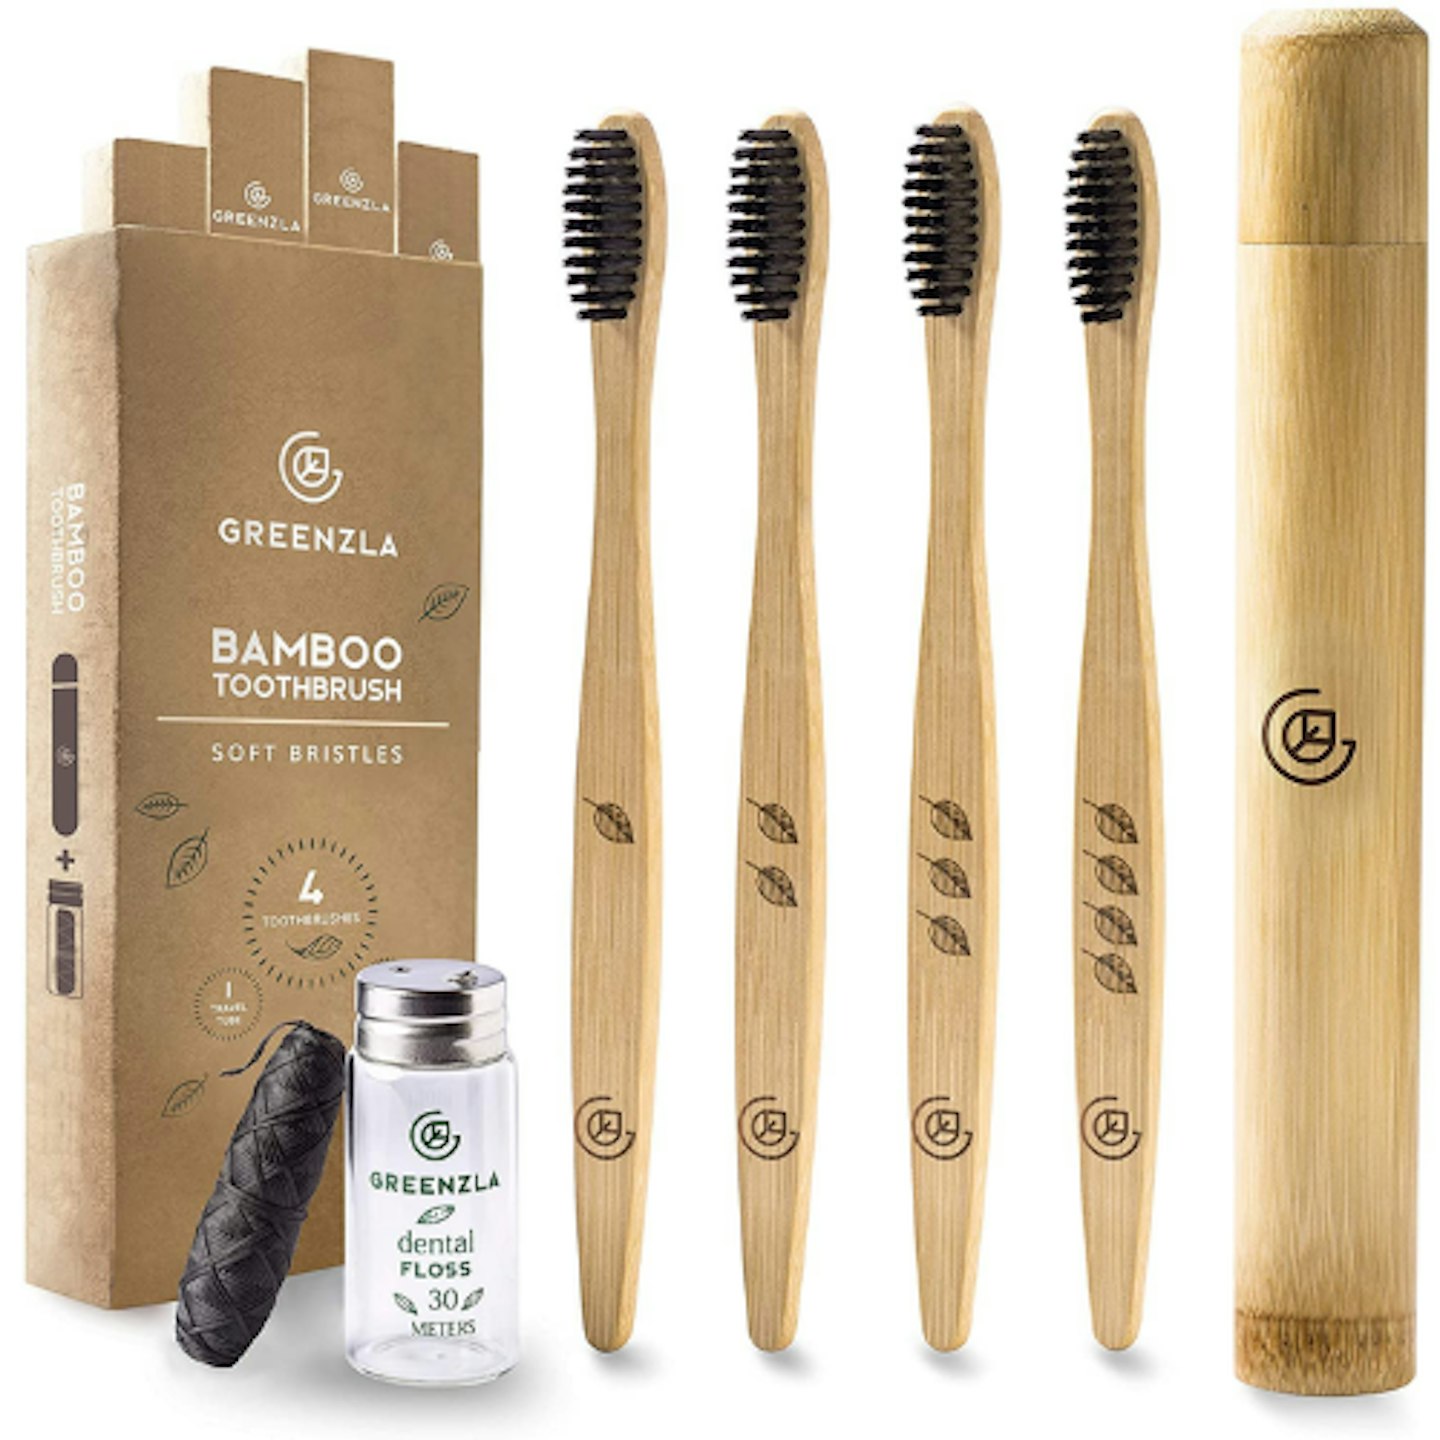 Greenzla Bamboo Toothbrush with Travel Toothbrush Case & Charcoal Dental Floss, 4 Pack